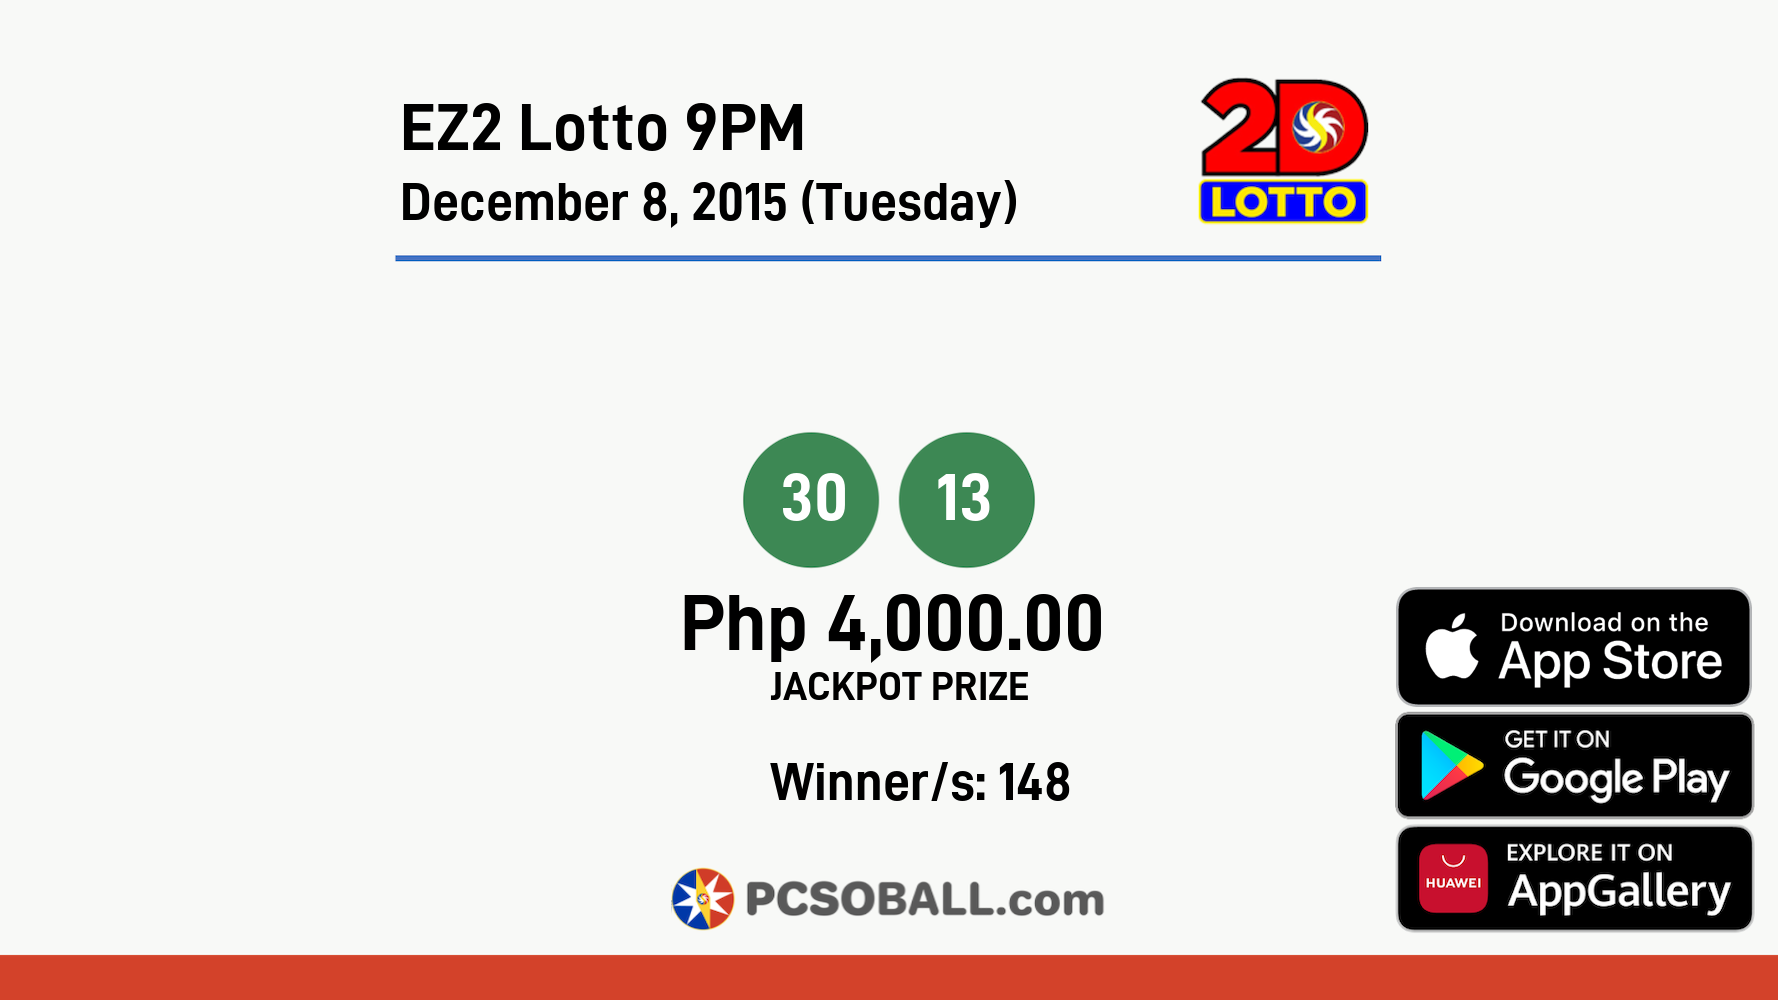 EZ2 Lotto 9PM December 8, 2015 (Tuesday) Result